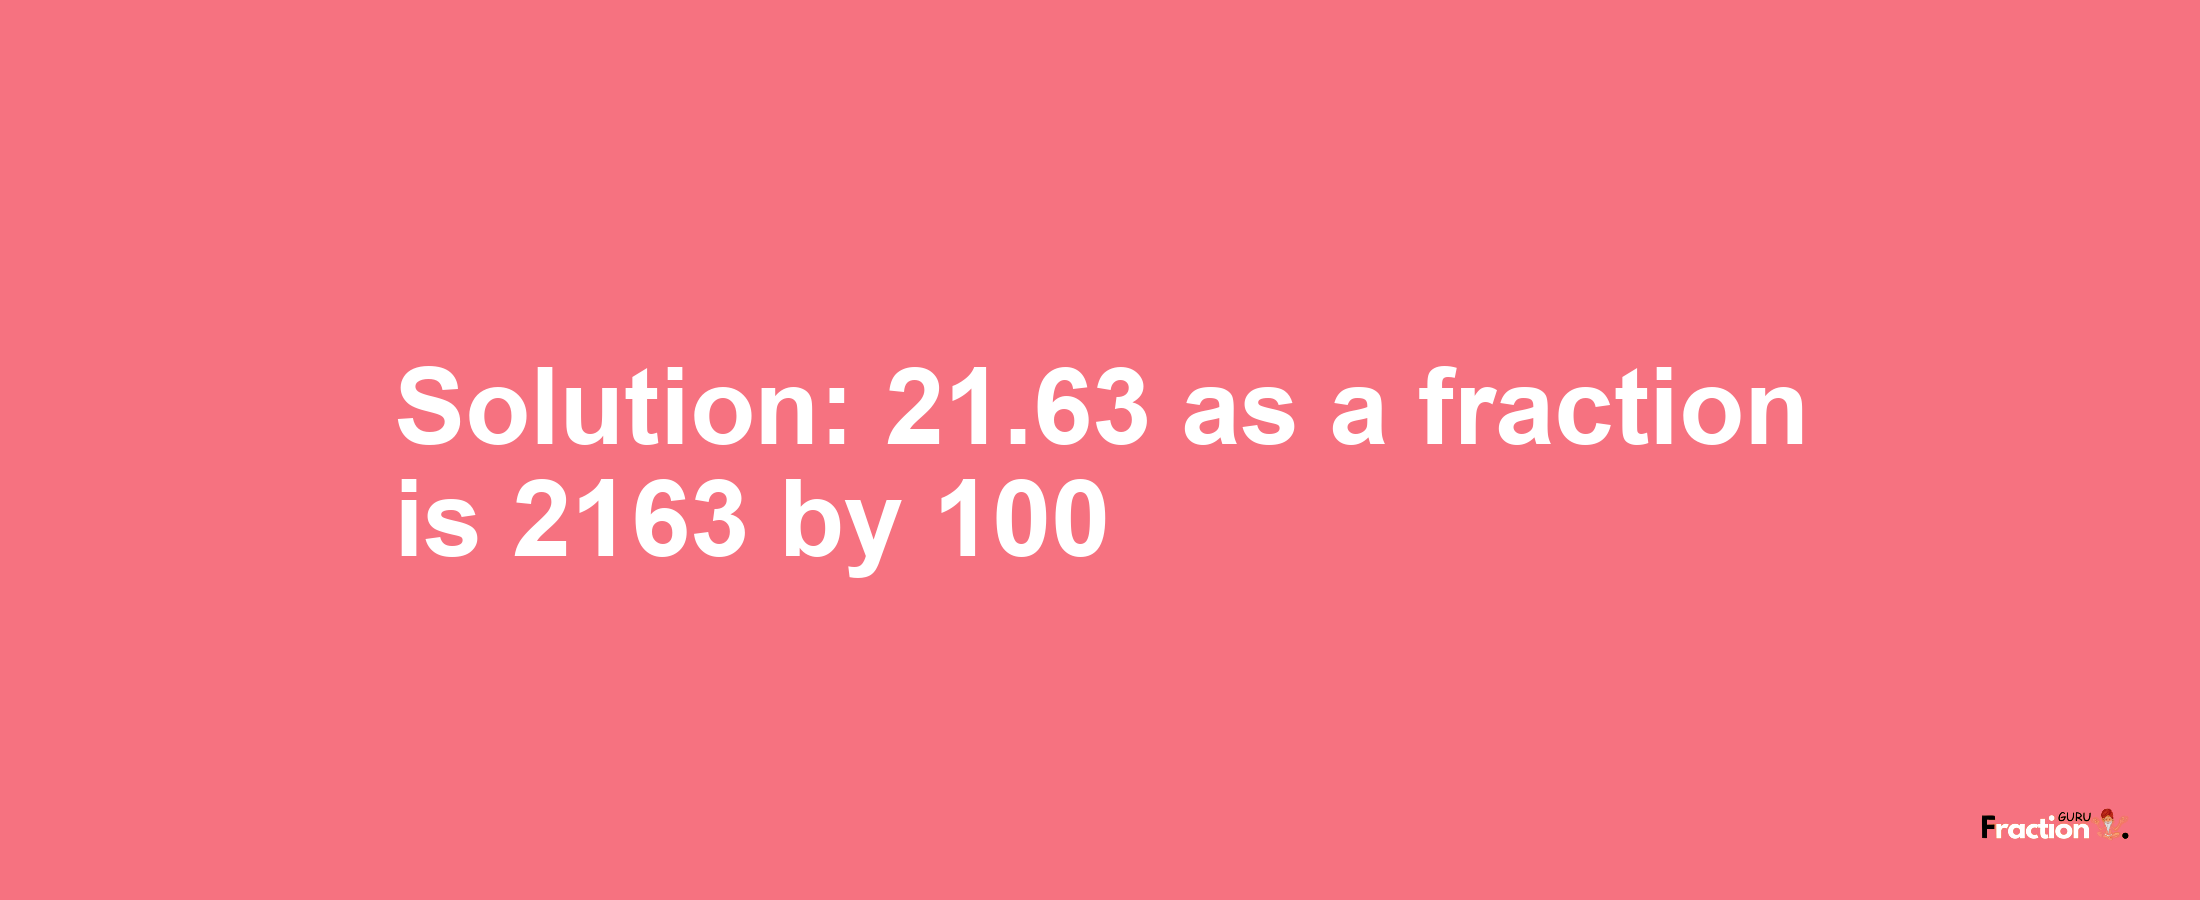 Solution:21.63 as a fraction is 2163/100